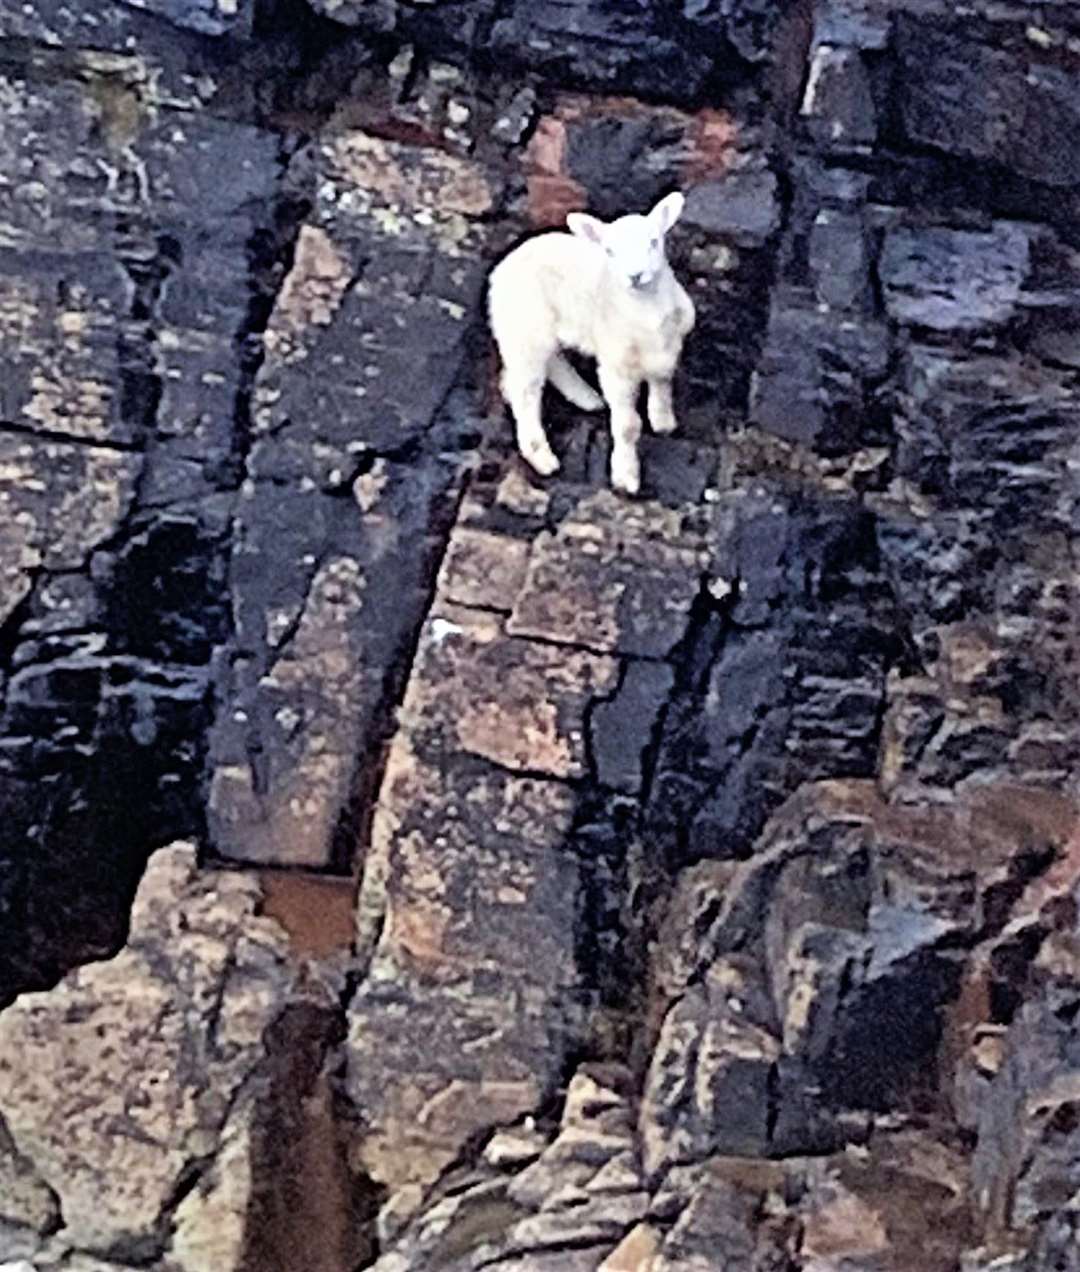 The lamb was trapped on a cliff ledge until the two woman managed to save it.